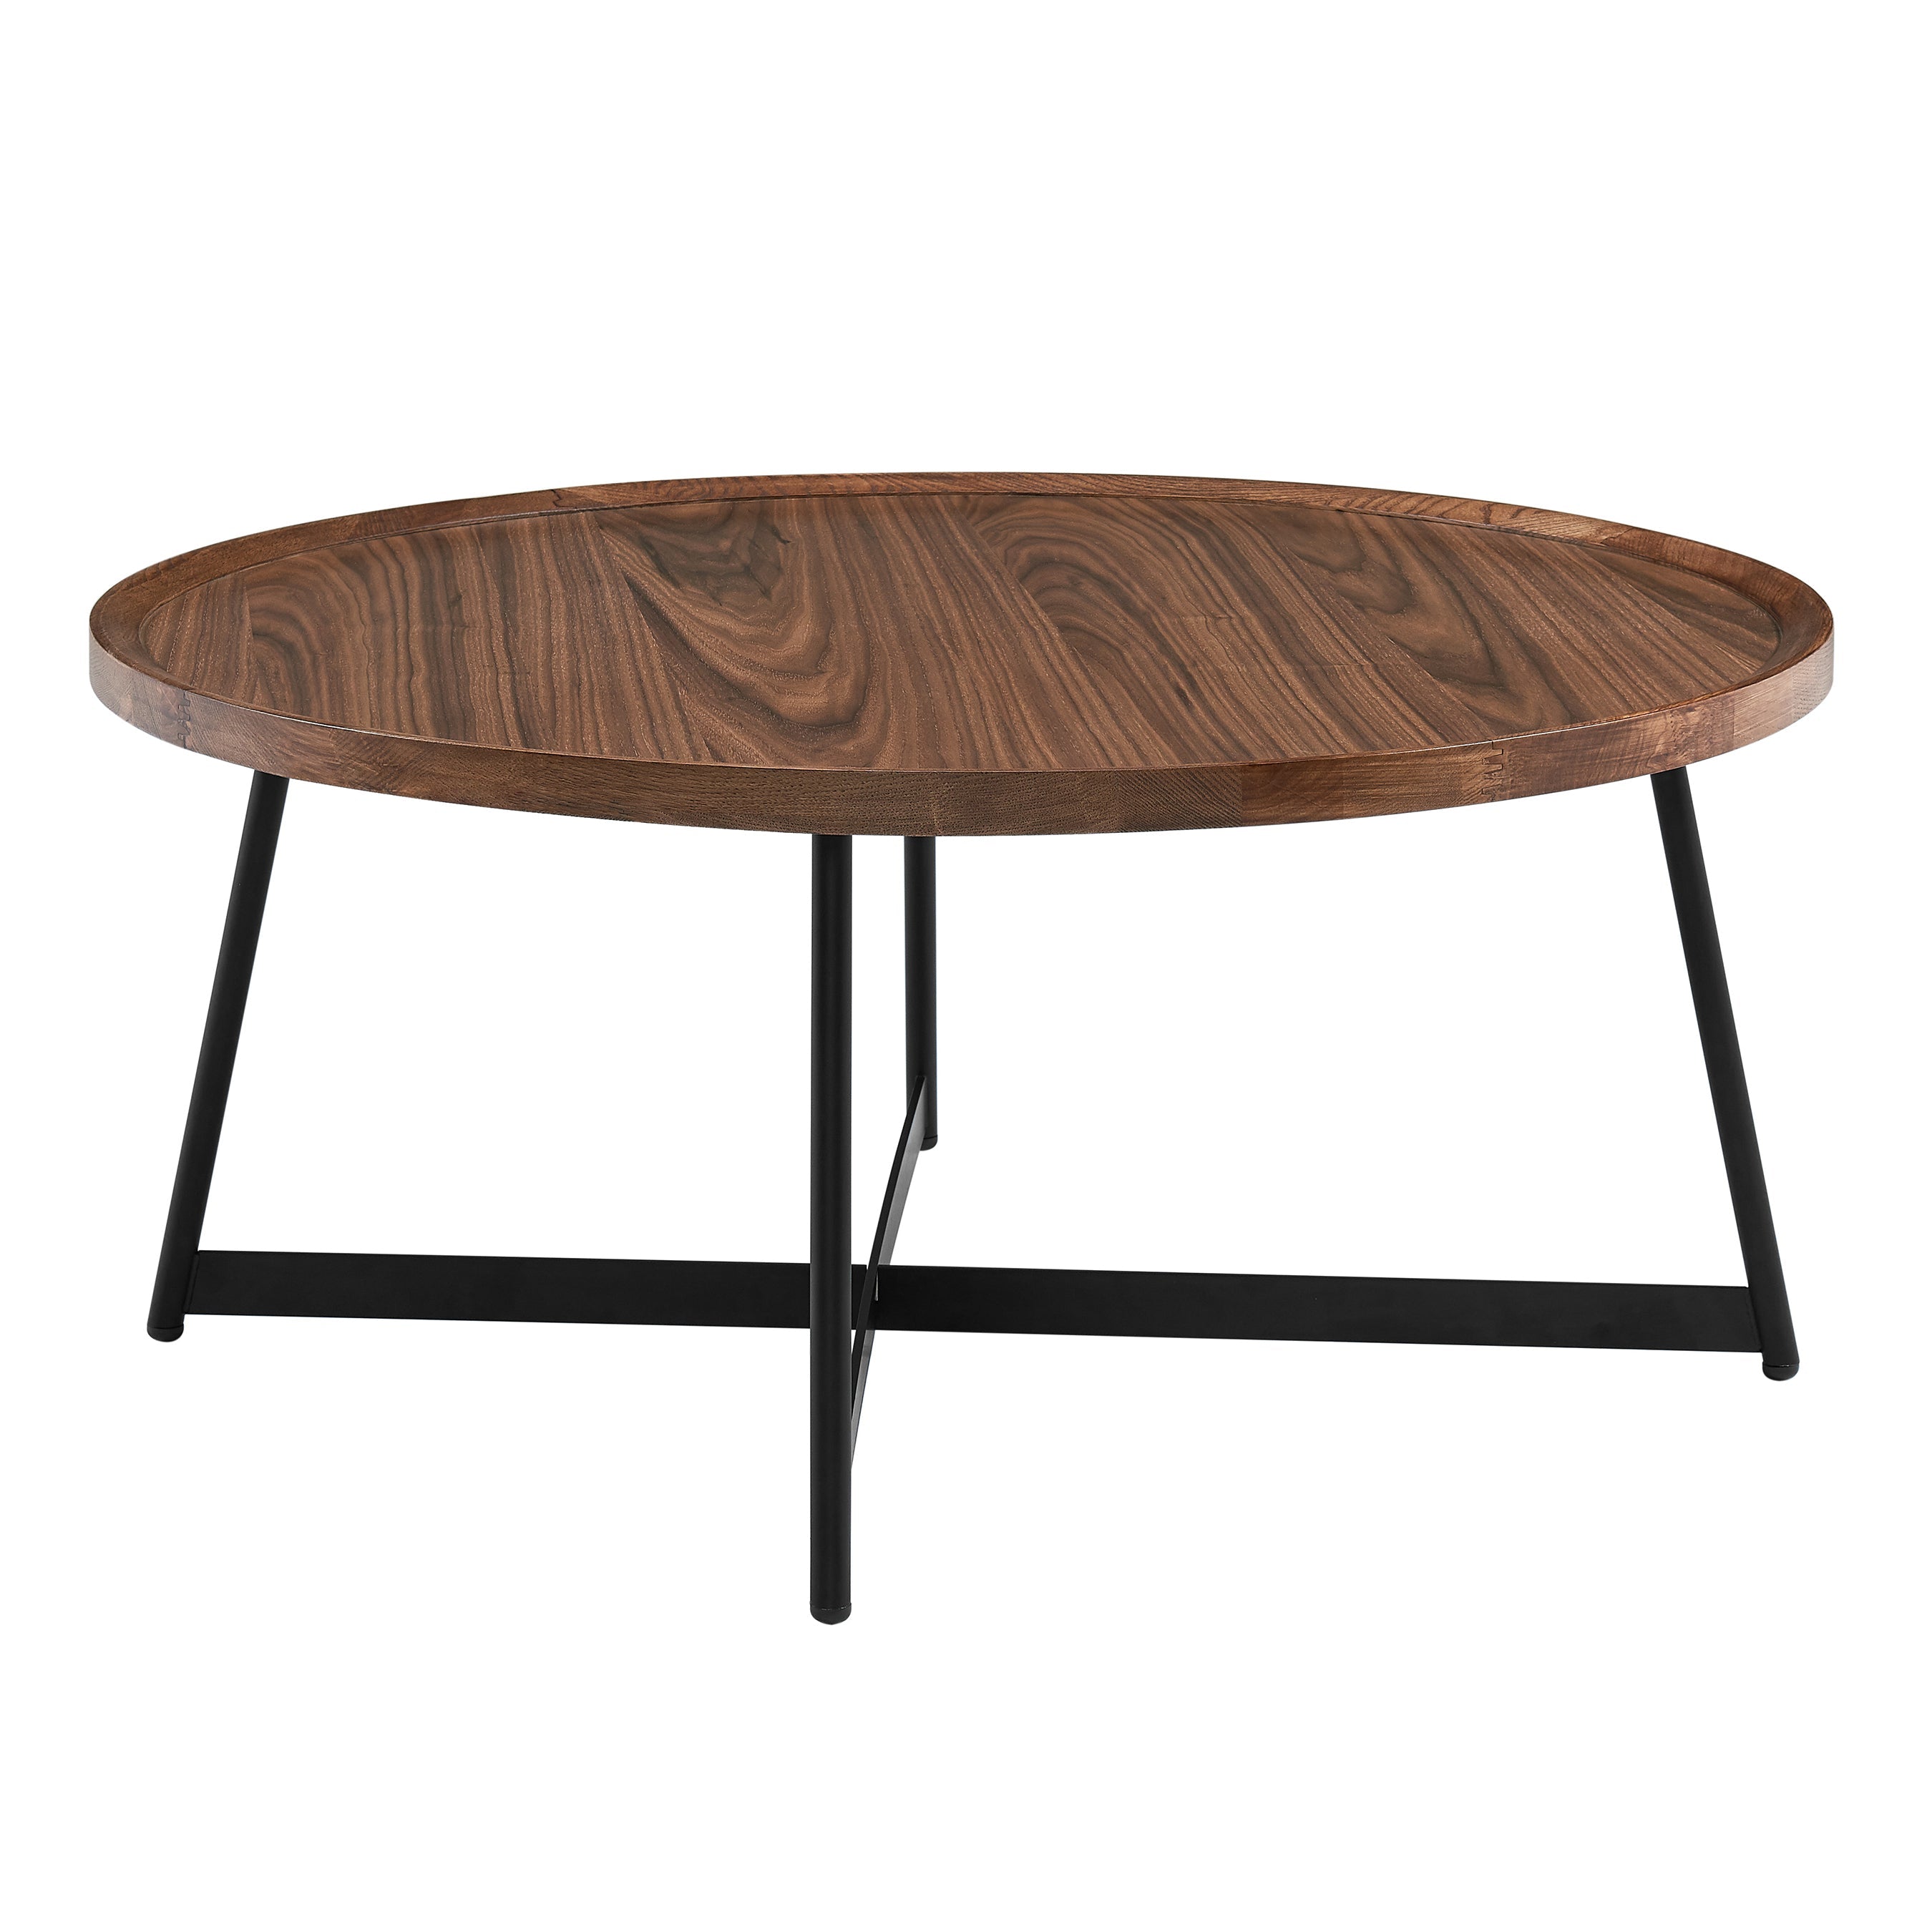 Niklaus 35" Round Coffee Table - What A Room